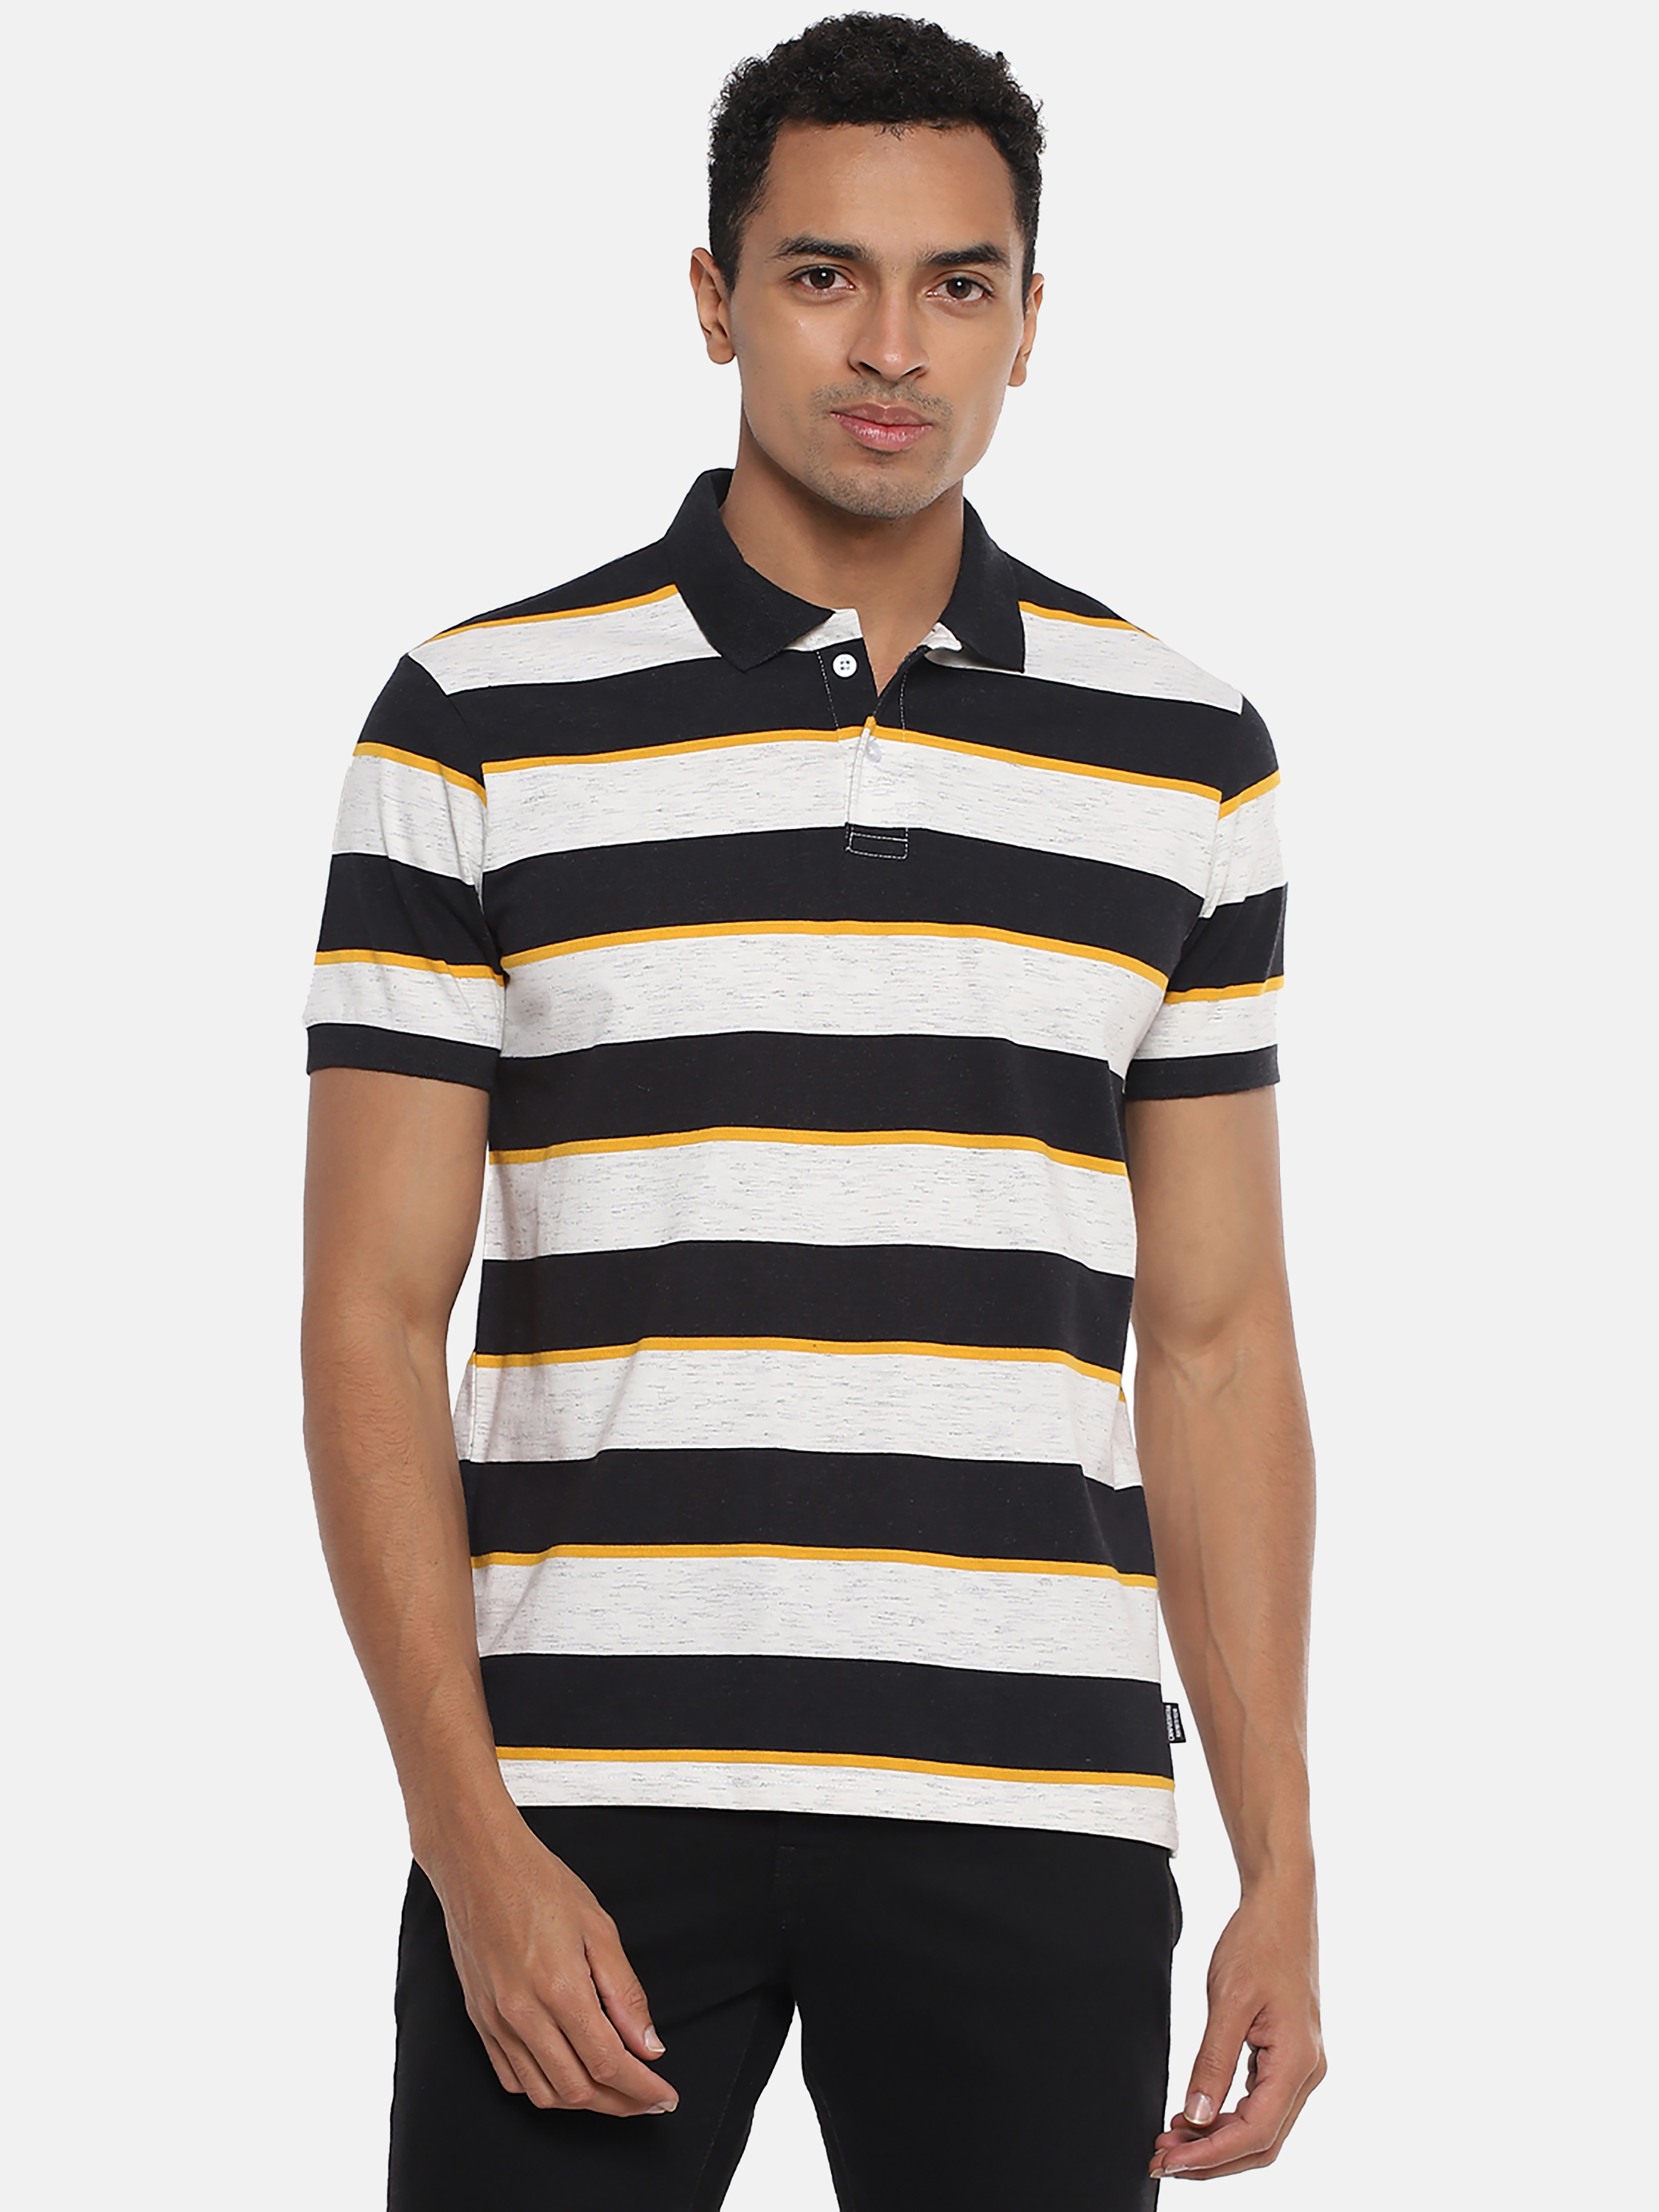 Campus Sutra Men Stylish Casual Polo T-shirt